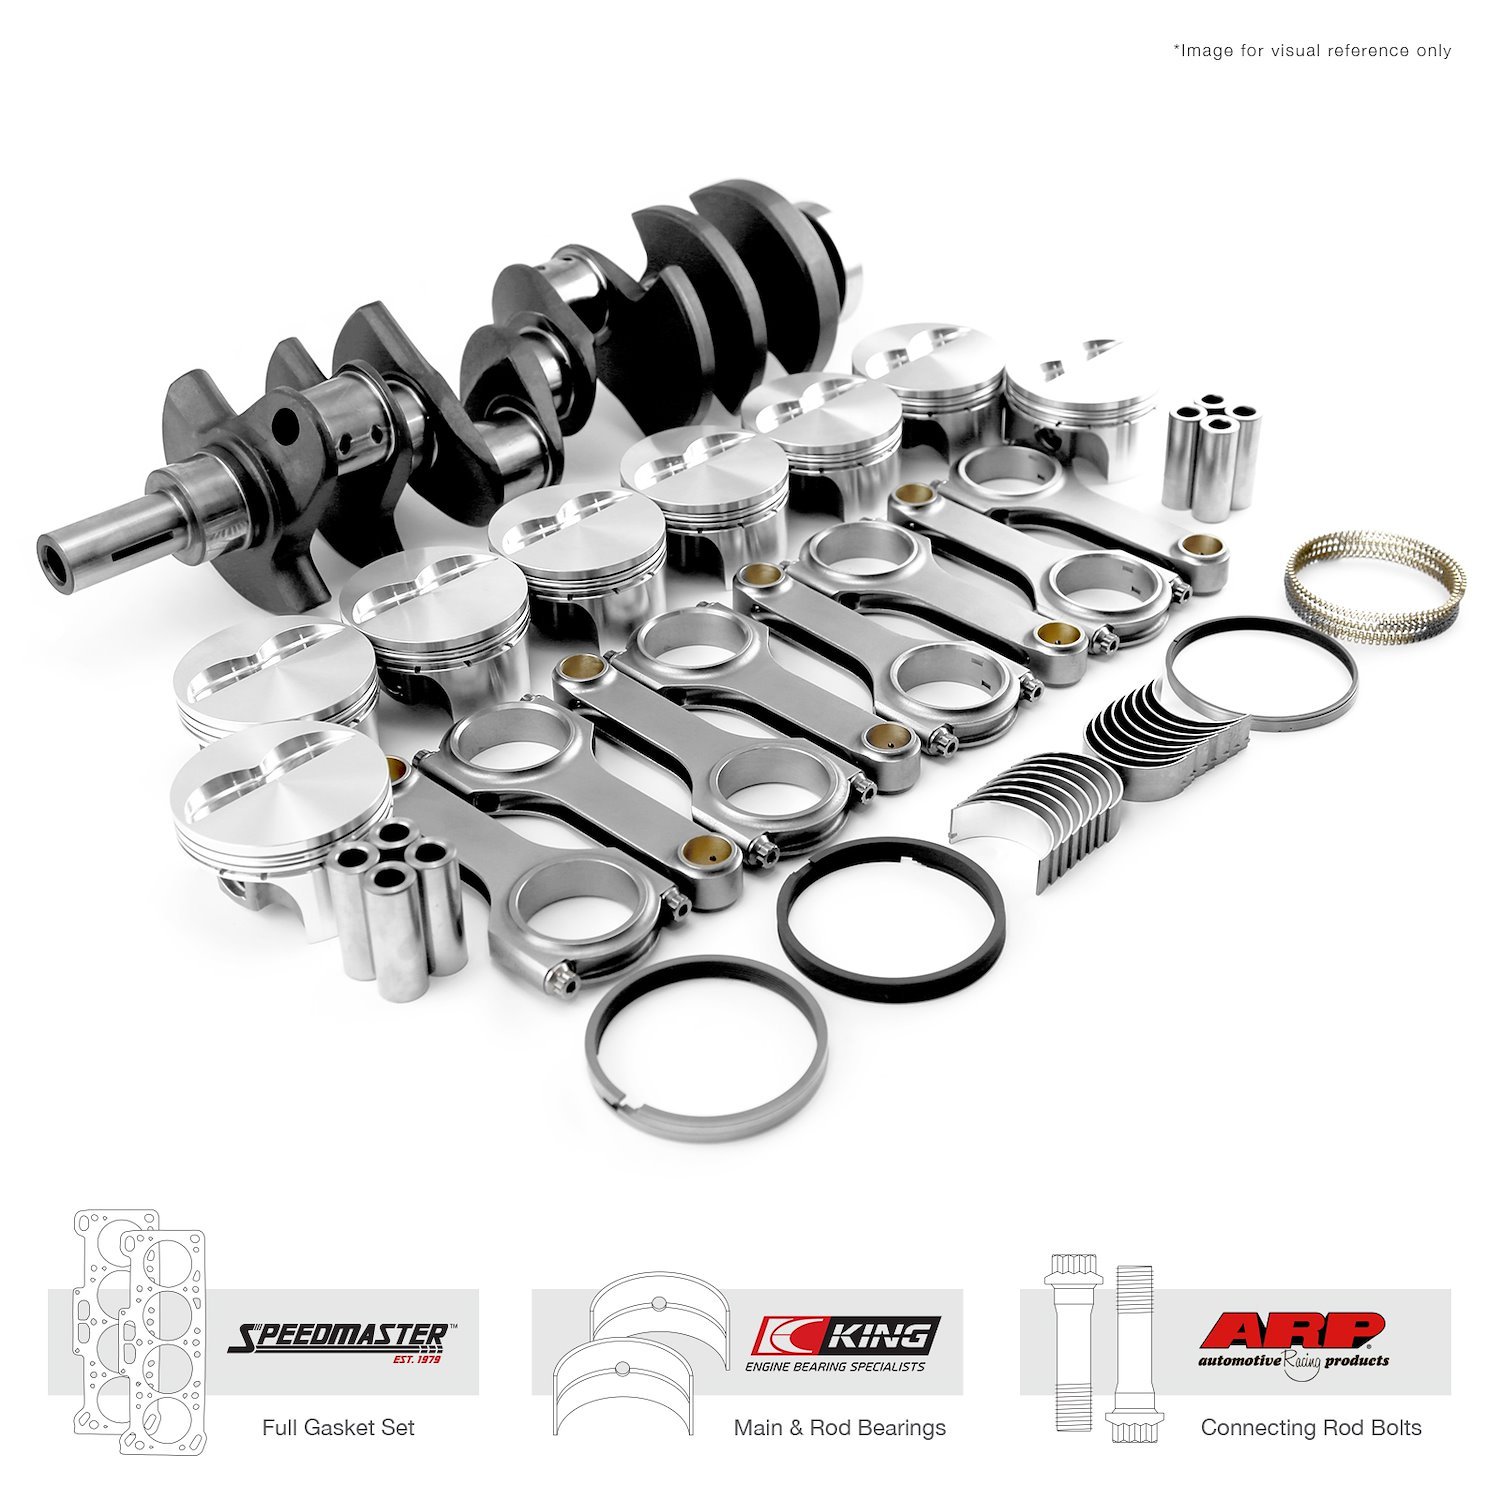 1-290-008 Chevy SBC 350 3.750 in. 383 ci 2Pc-Seal Rotating Assembly Kit - Outlaw Series